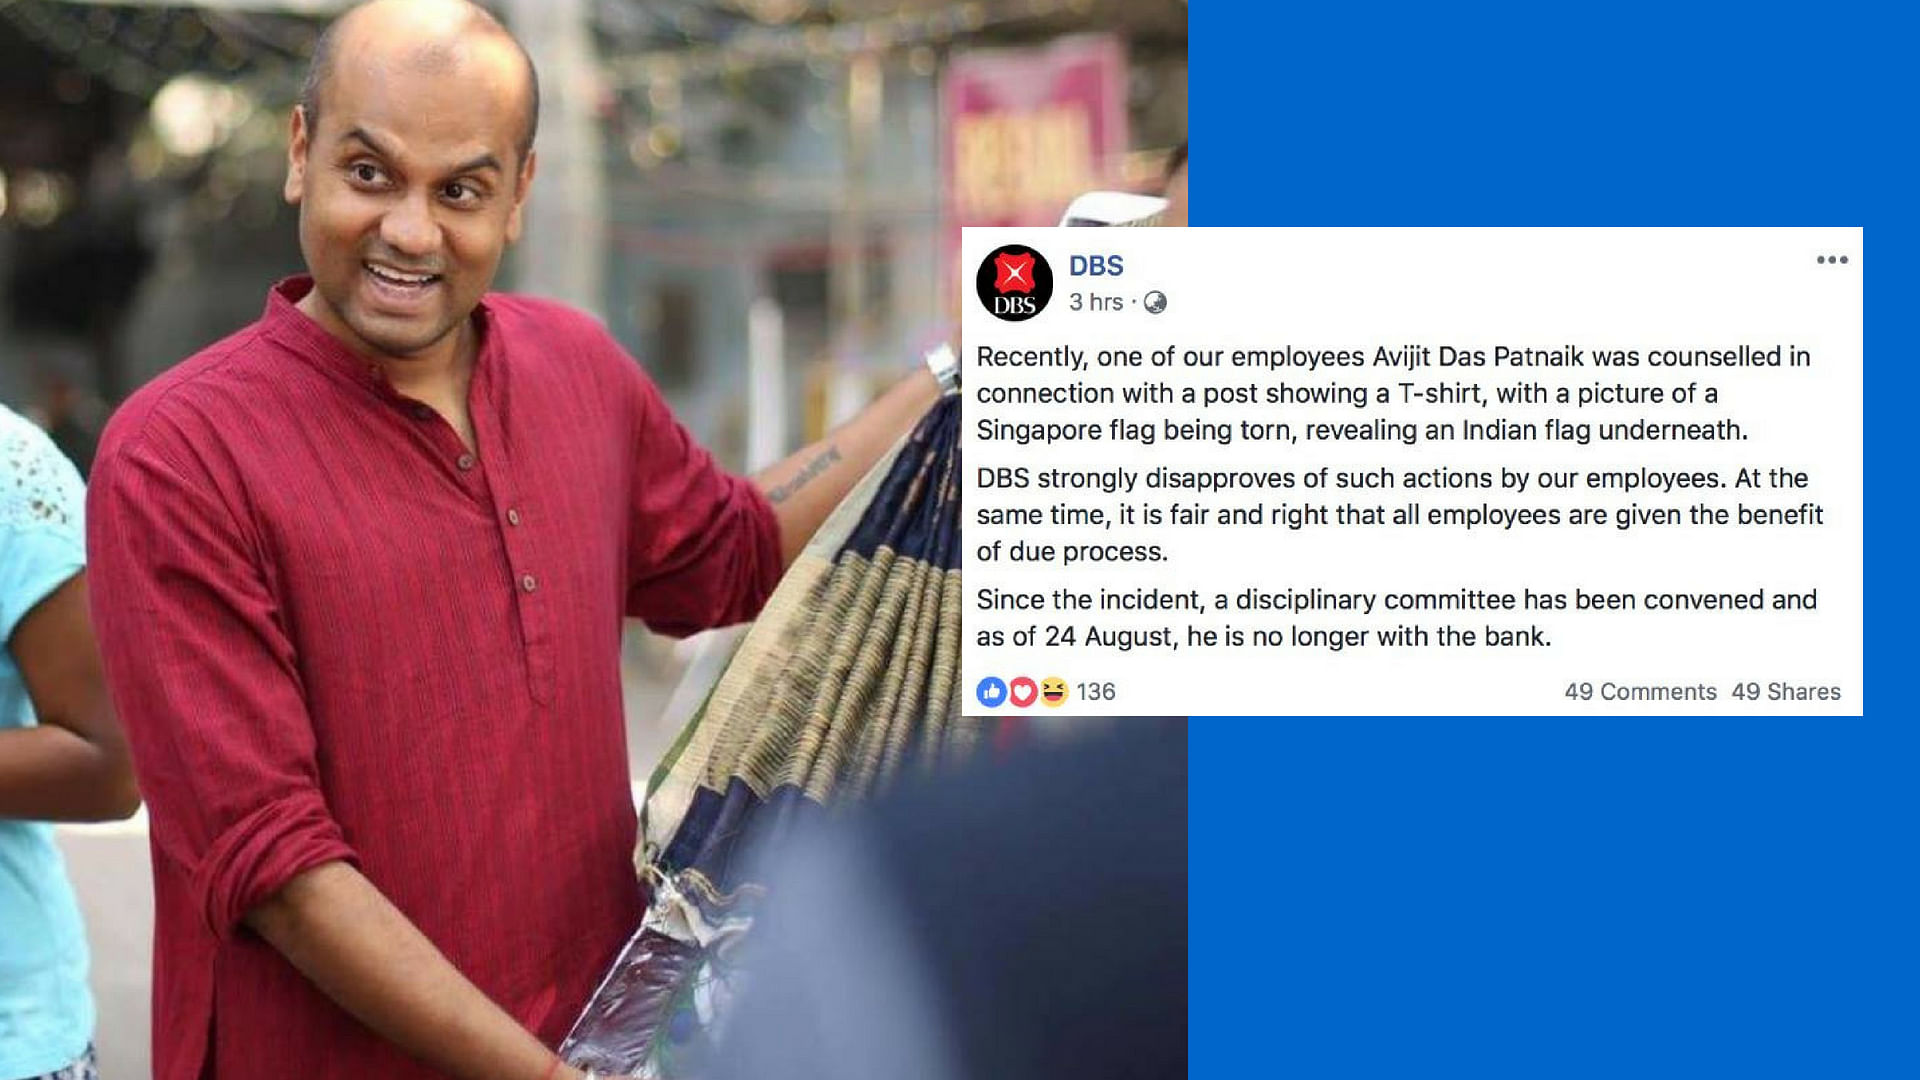 DBS bank fired an employee for sharing a picture of a T-shirt with a print of a Singapore flag being torn to reveal an Indian flag underneath.